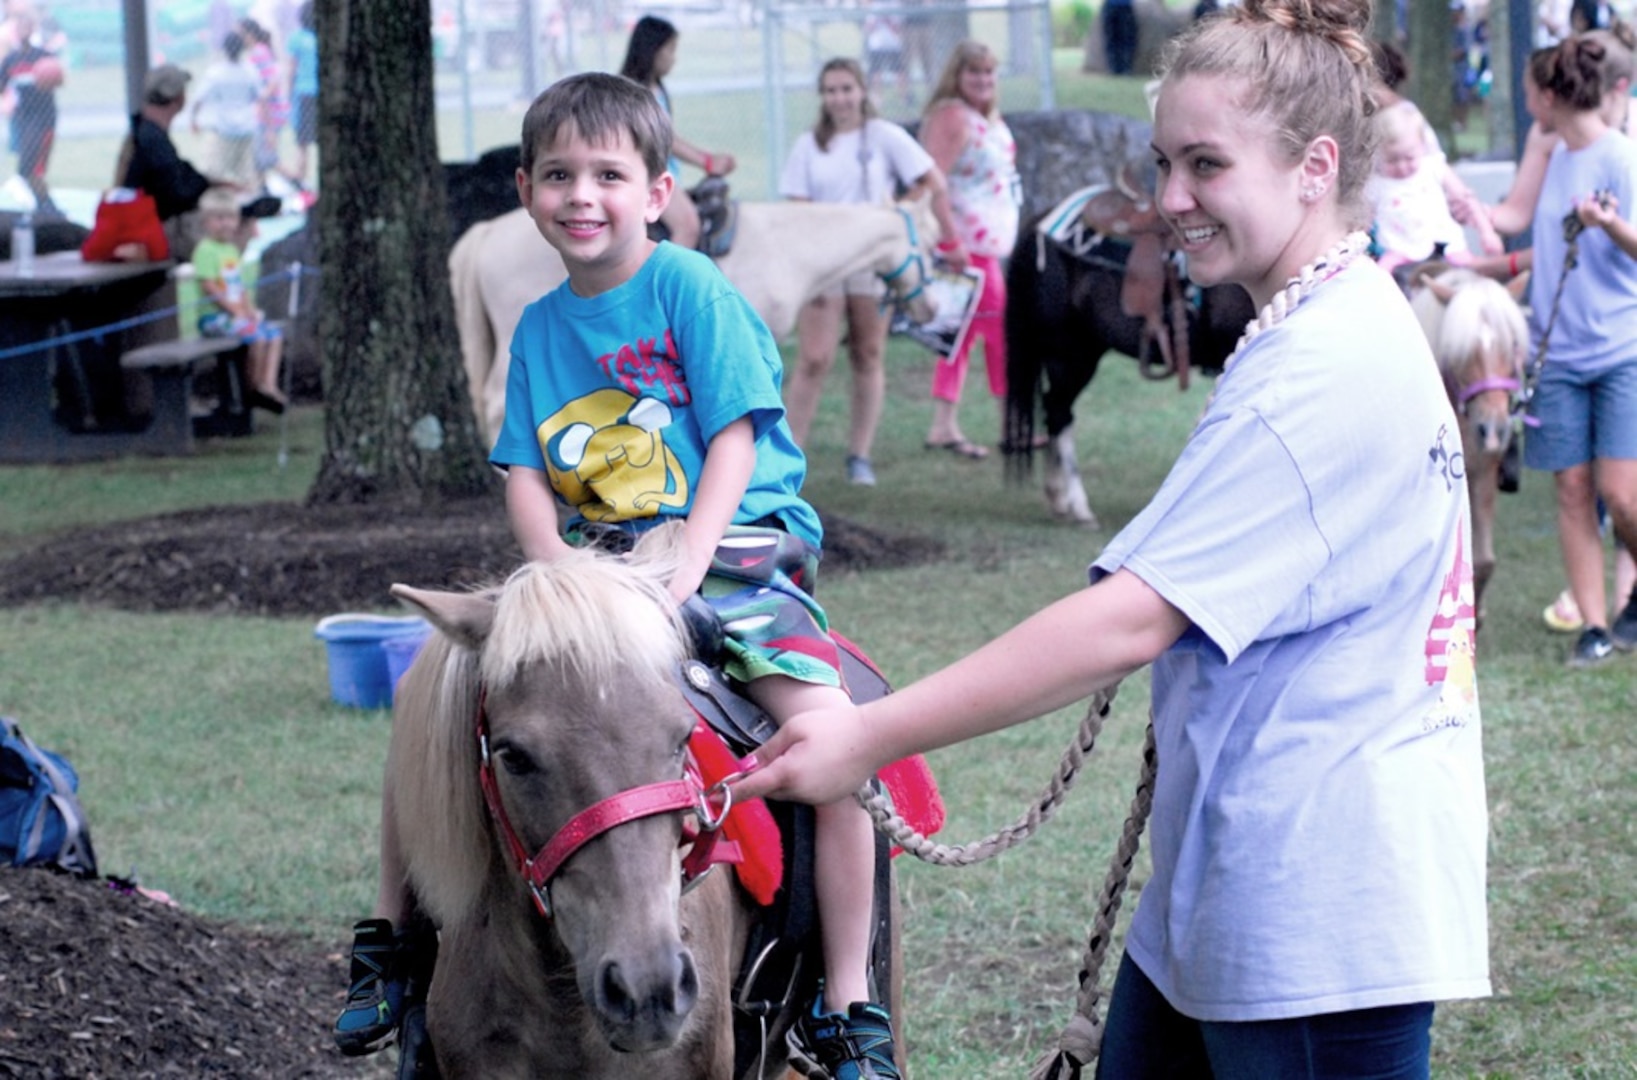 Caleb Hasley, 6, is all smiles on the pony ride during one of the many events at the McNamara Headquarters Complex Family Day June 28.